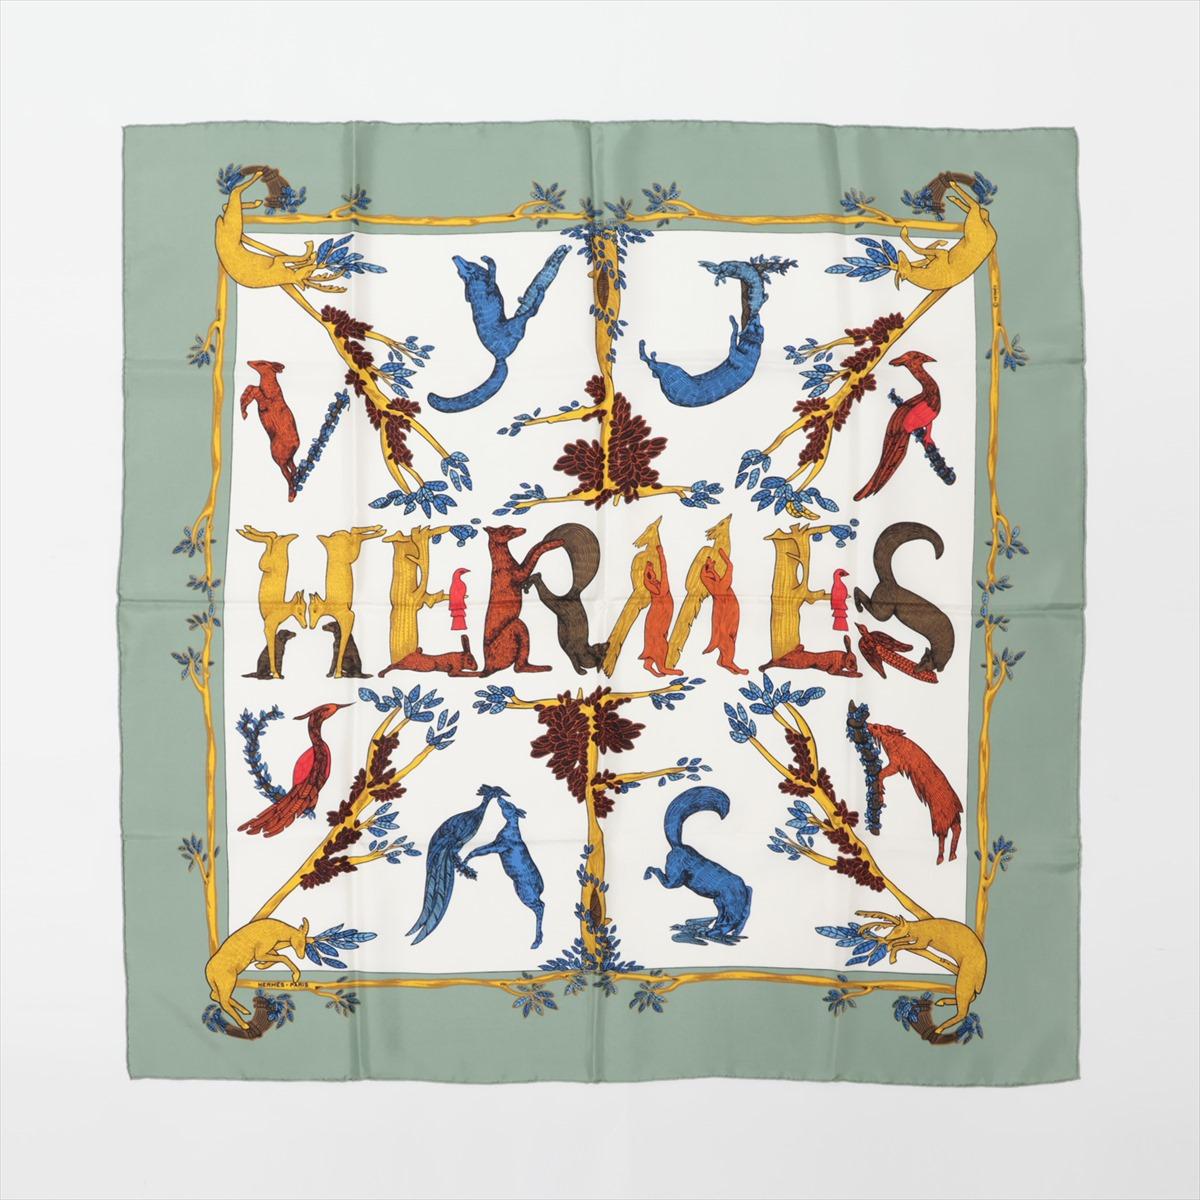 The Hermès Carré Animal Alphabets Scarf in White and Green is a stunning accessory that seamlessly combines luxury and whimsy. Crafted from luxurious silk, the scarf features a playful print showcasing a menagerie of animals arranged in an alphabet